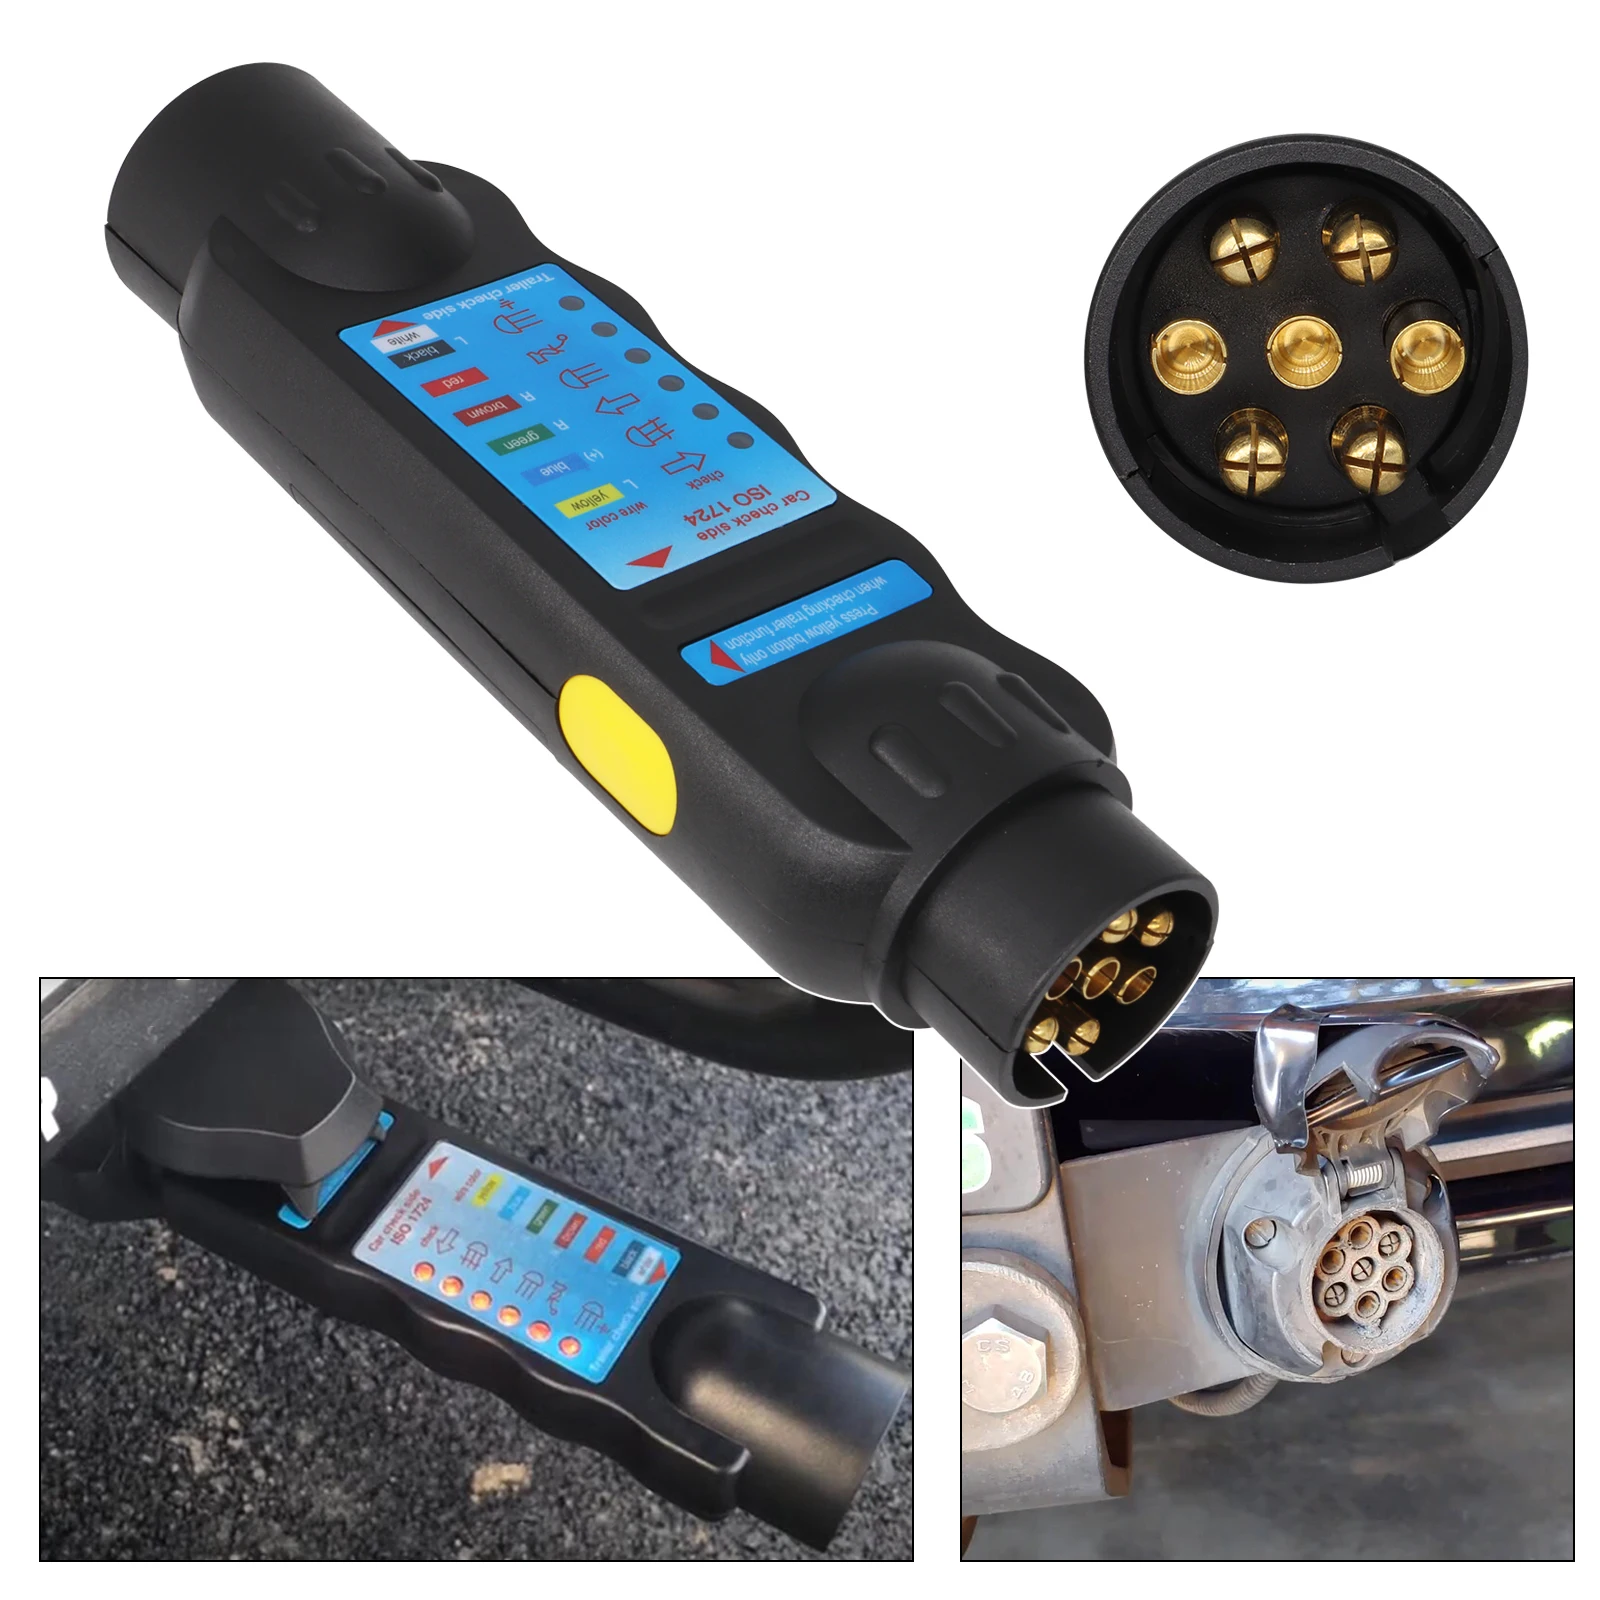 European 7 Pin 12V Trailer Socket Tester High Quality Wiring Circuit Light Test Tool Truck Accessories Car Circuit Testing Tools pat test passed or failed stickers electrical safety self adhesive labels vinyl stickers accessories